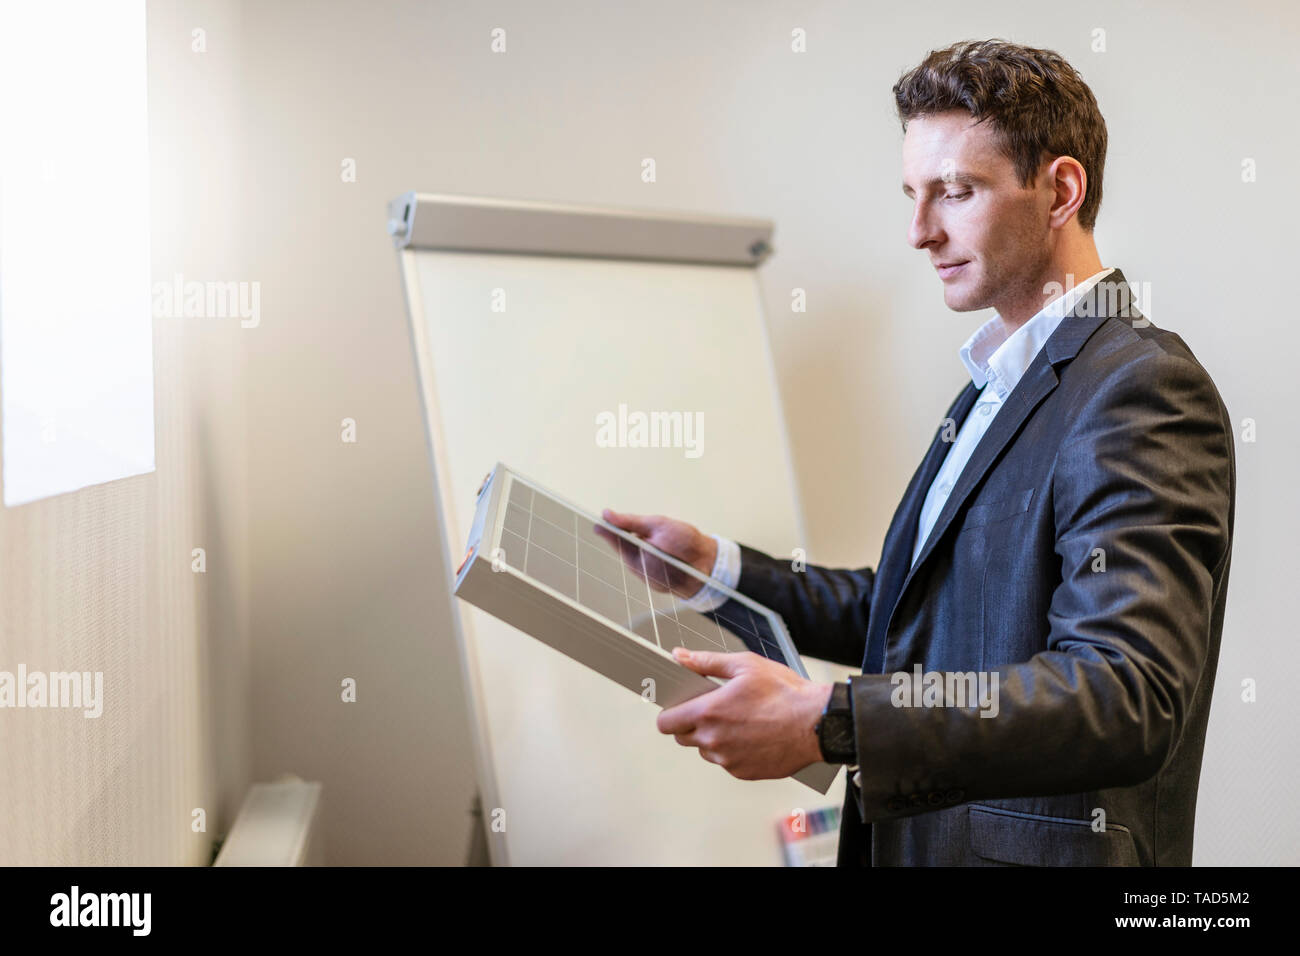 Businessman holding solar cell in office Stock Photo